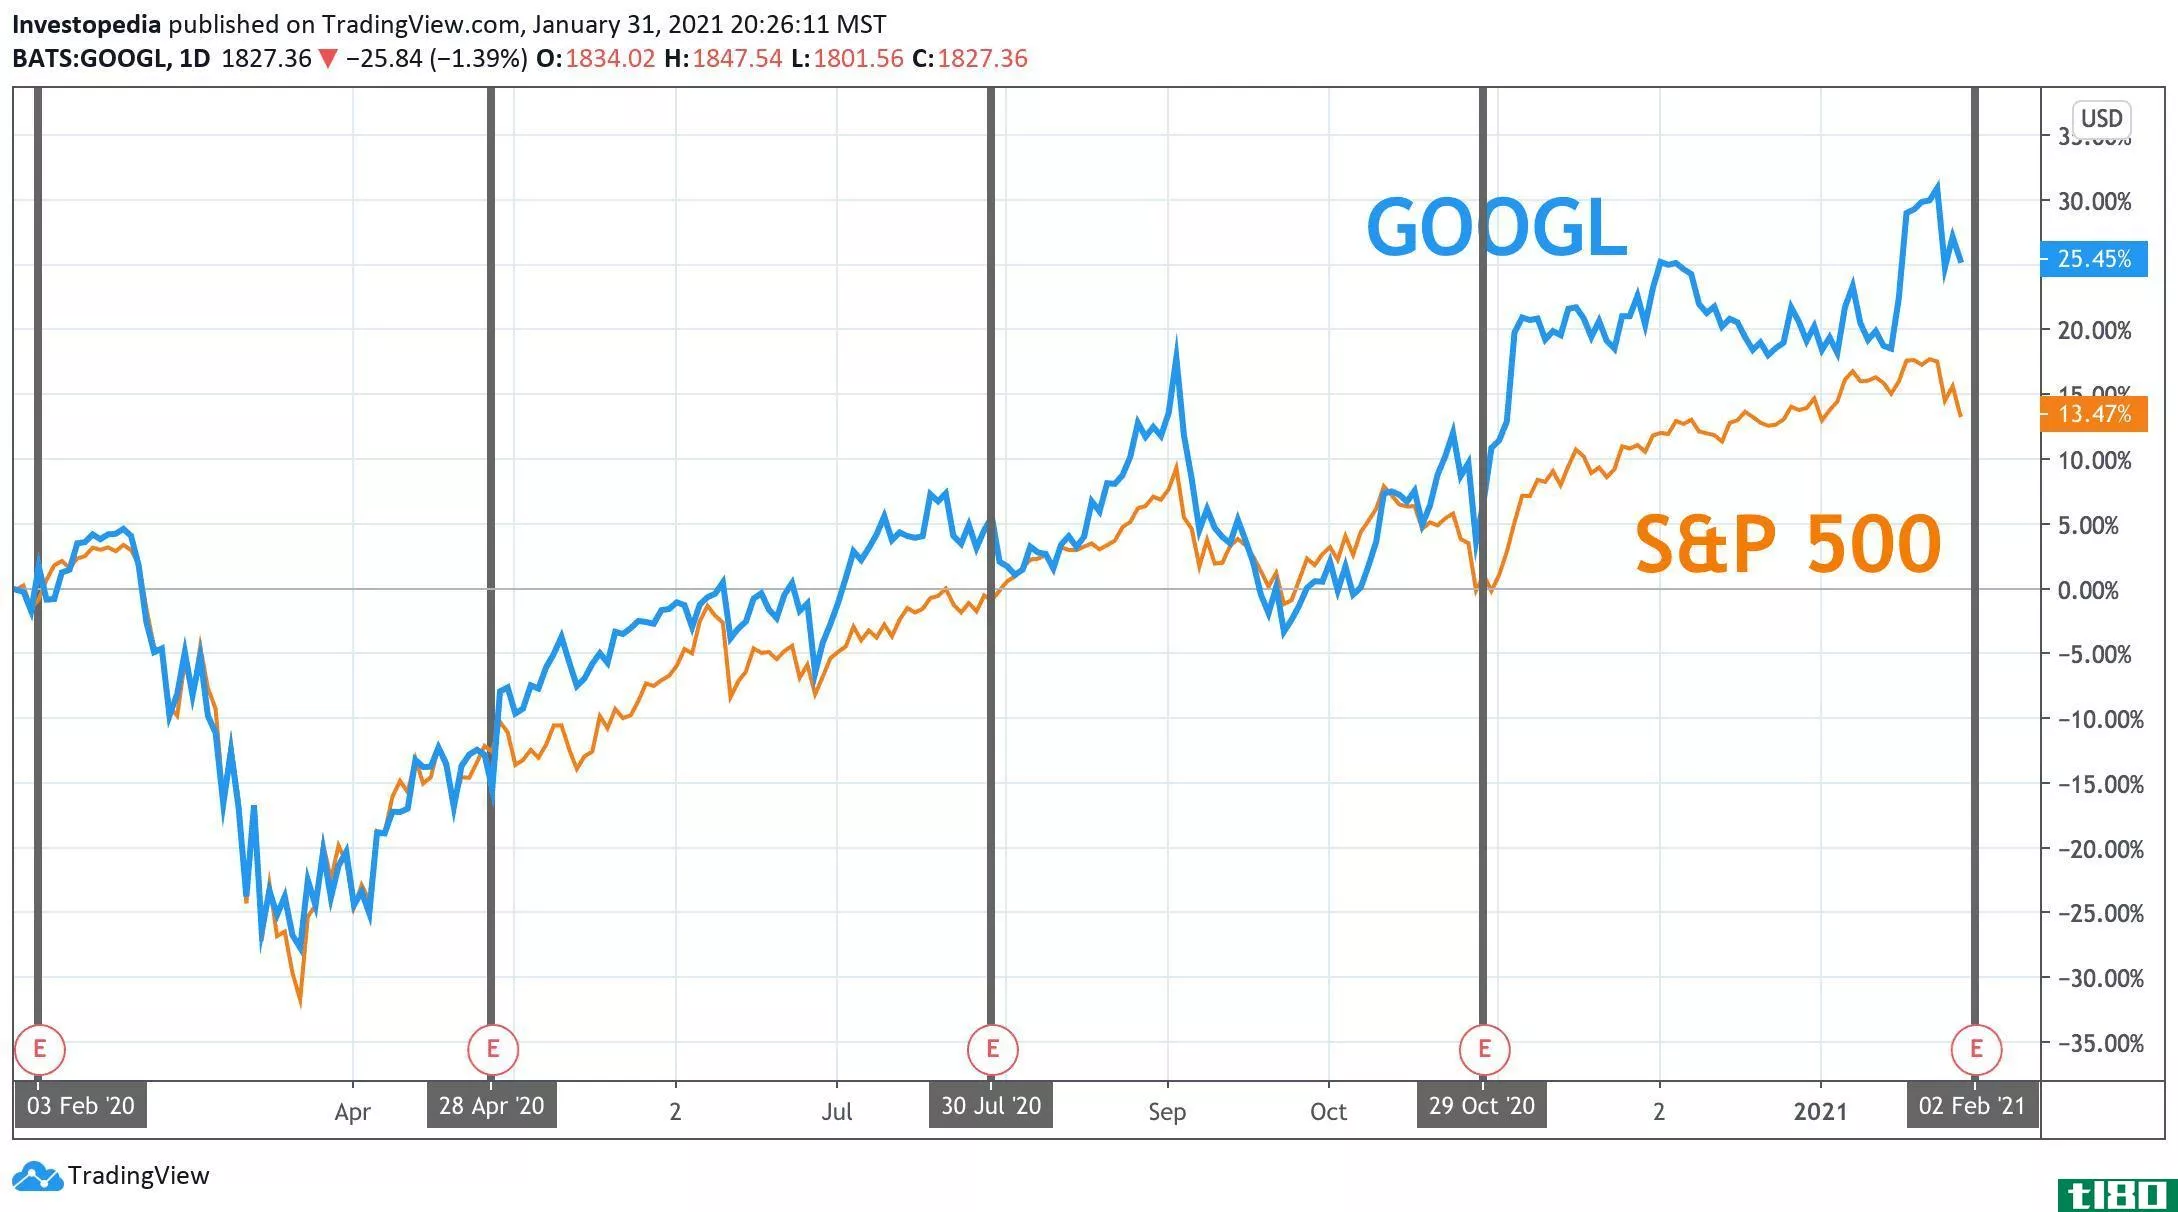 One Year Total Return for S&P 500 and Google